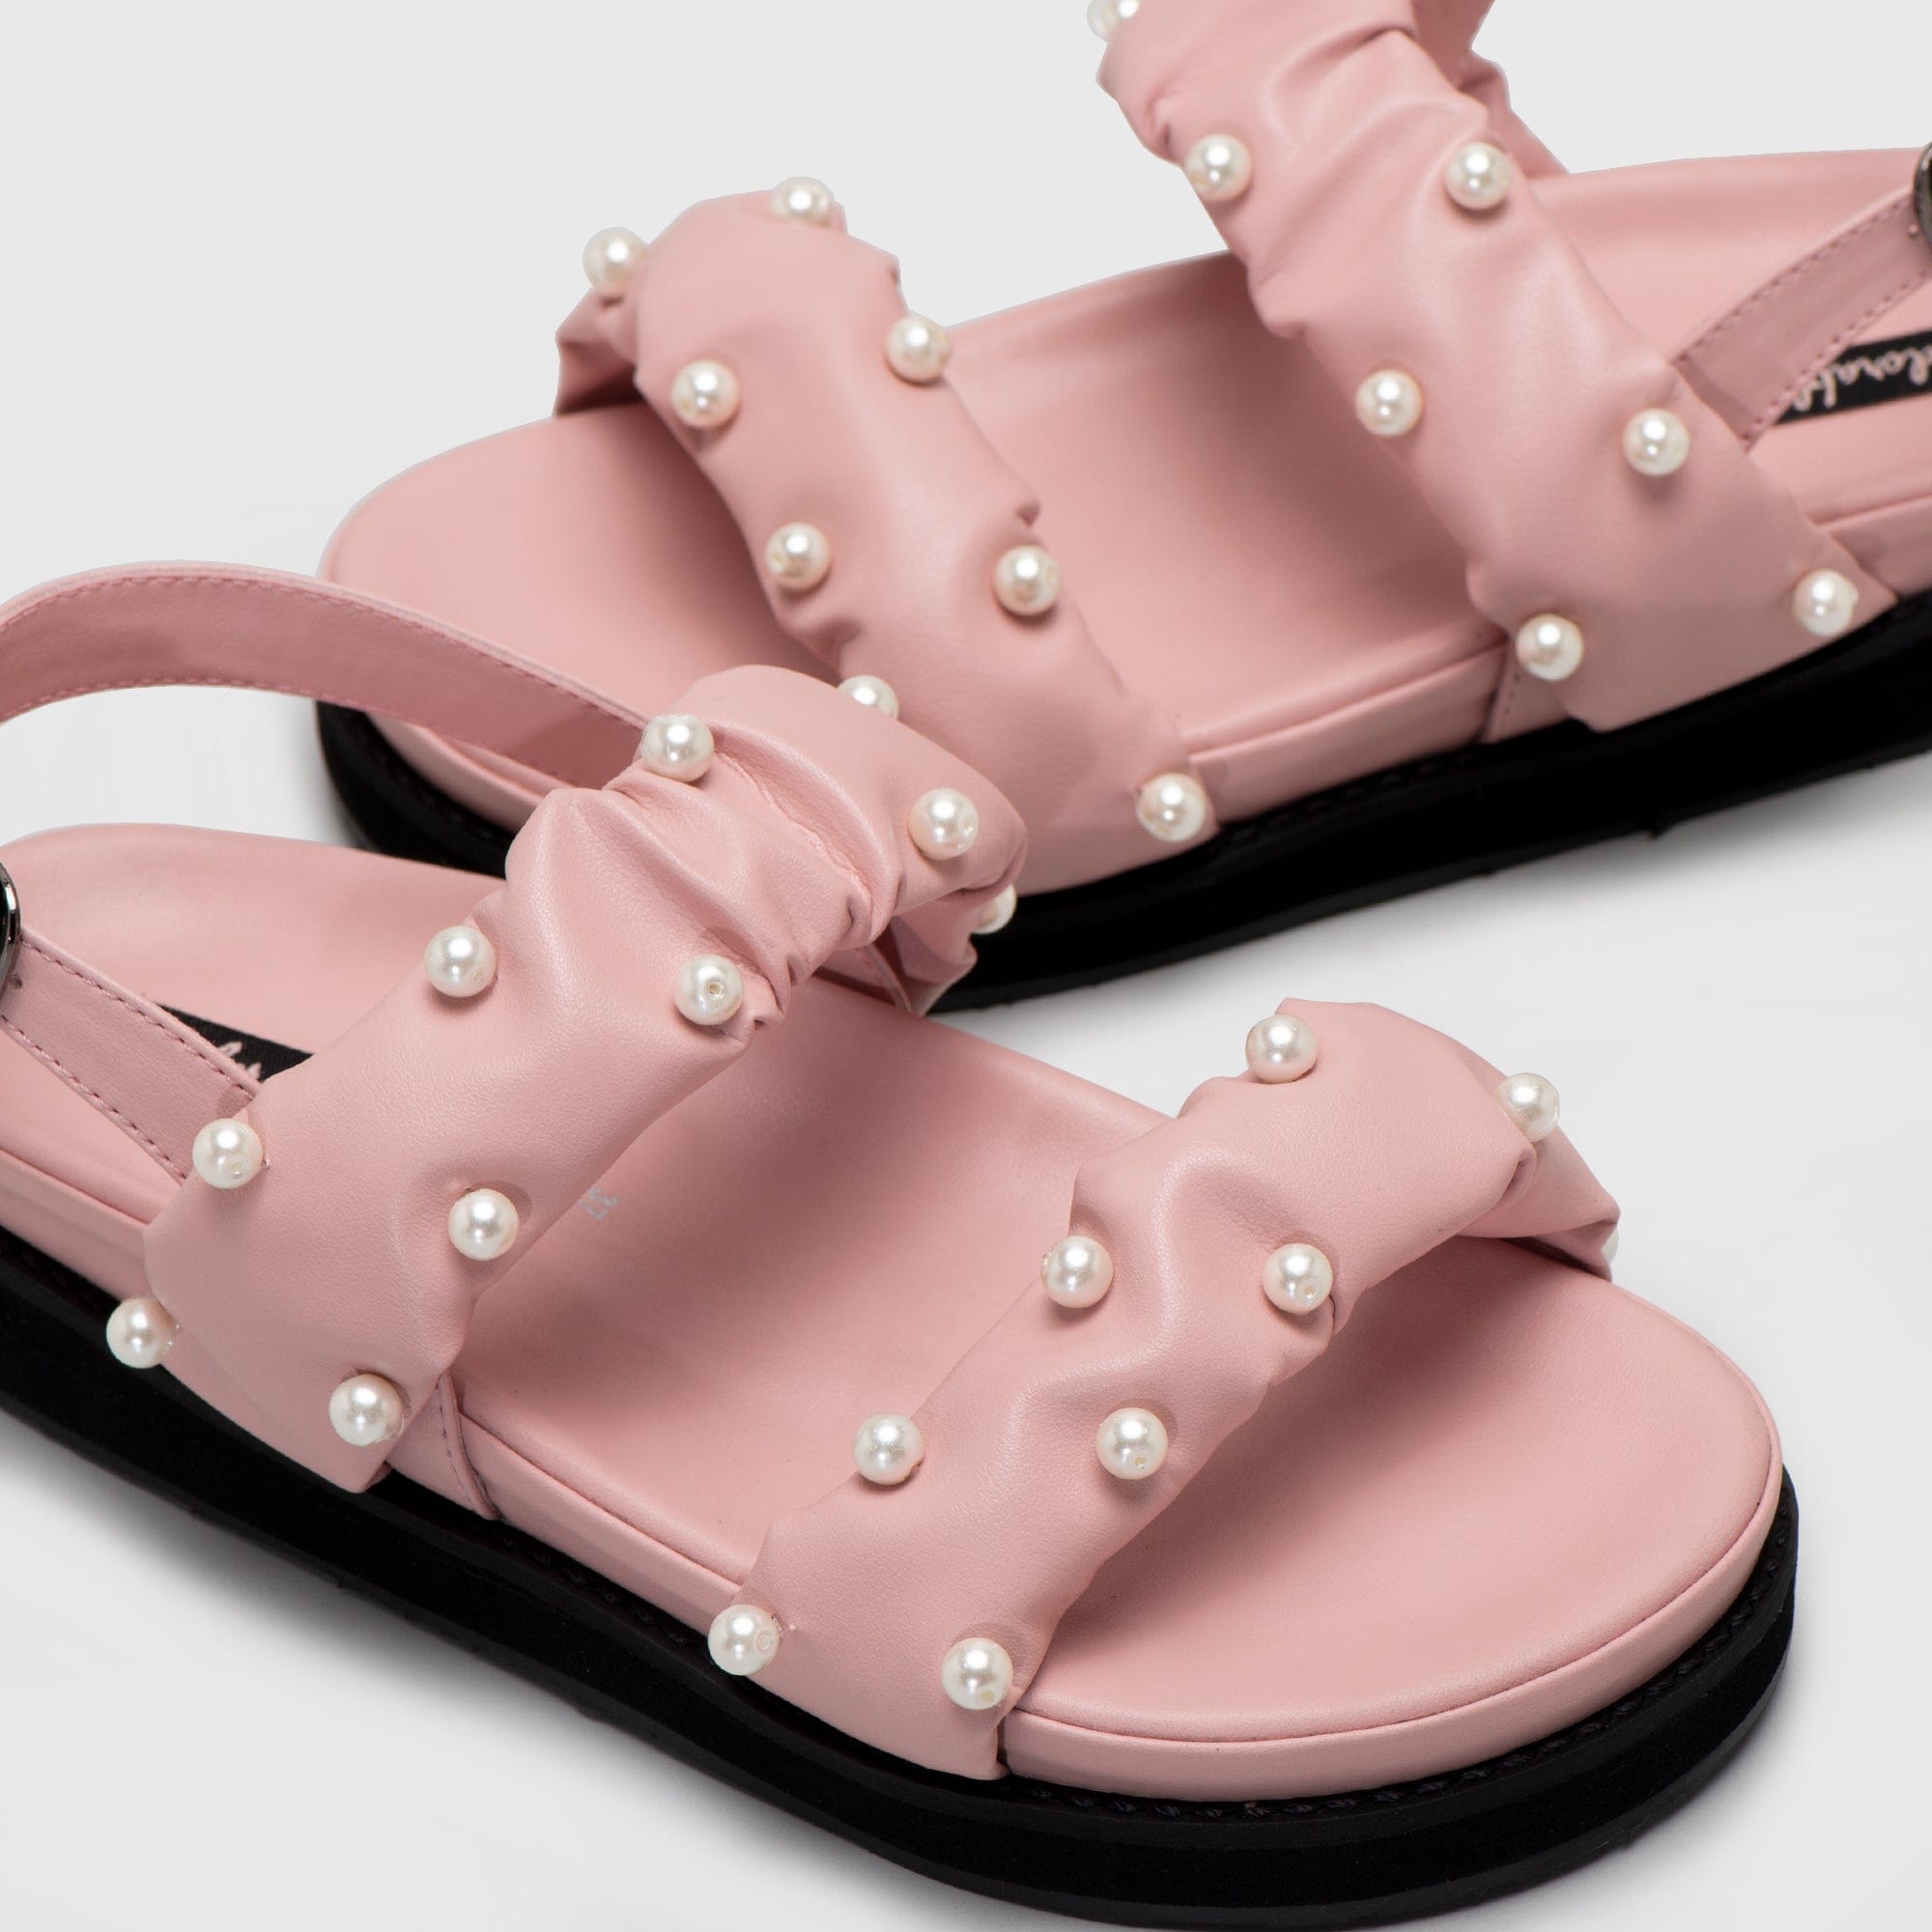 Adorable Projects Official Parinda Sandals Pink